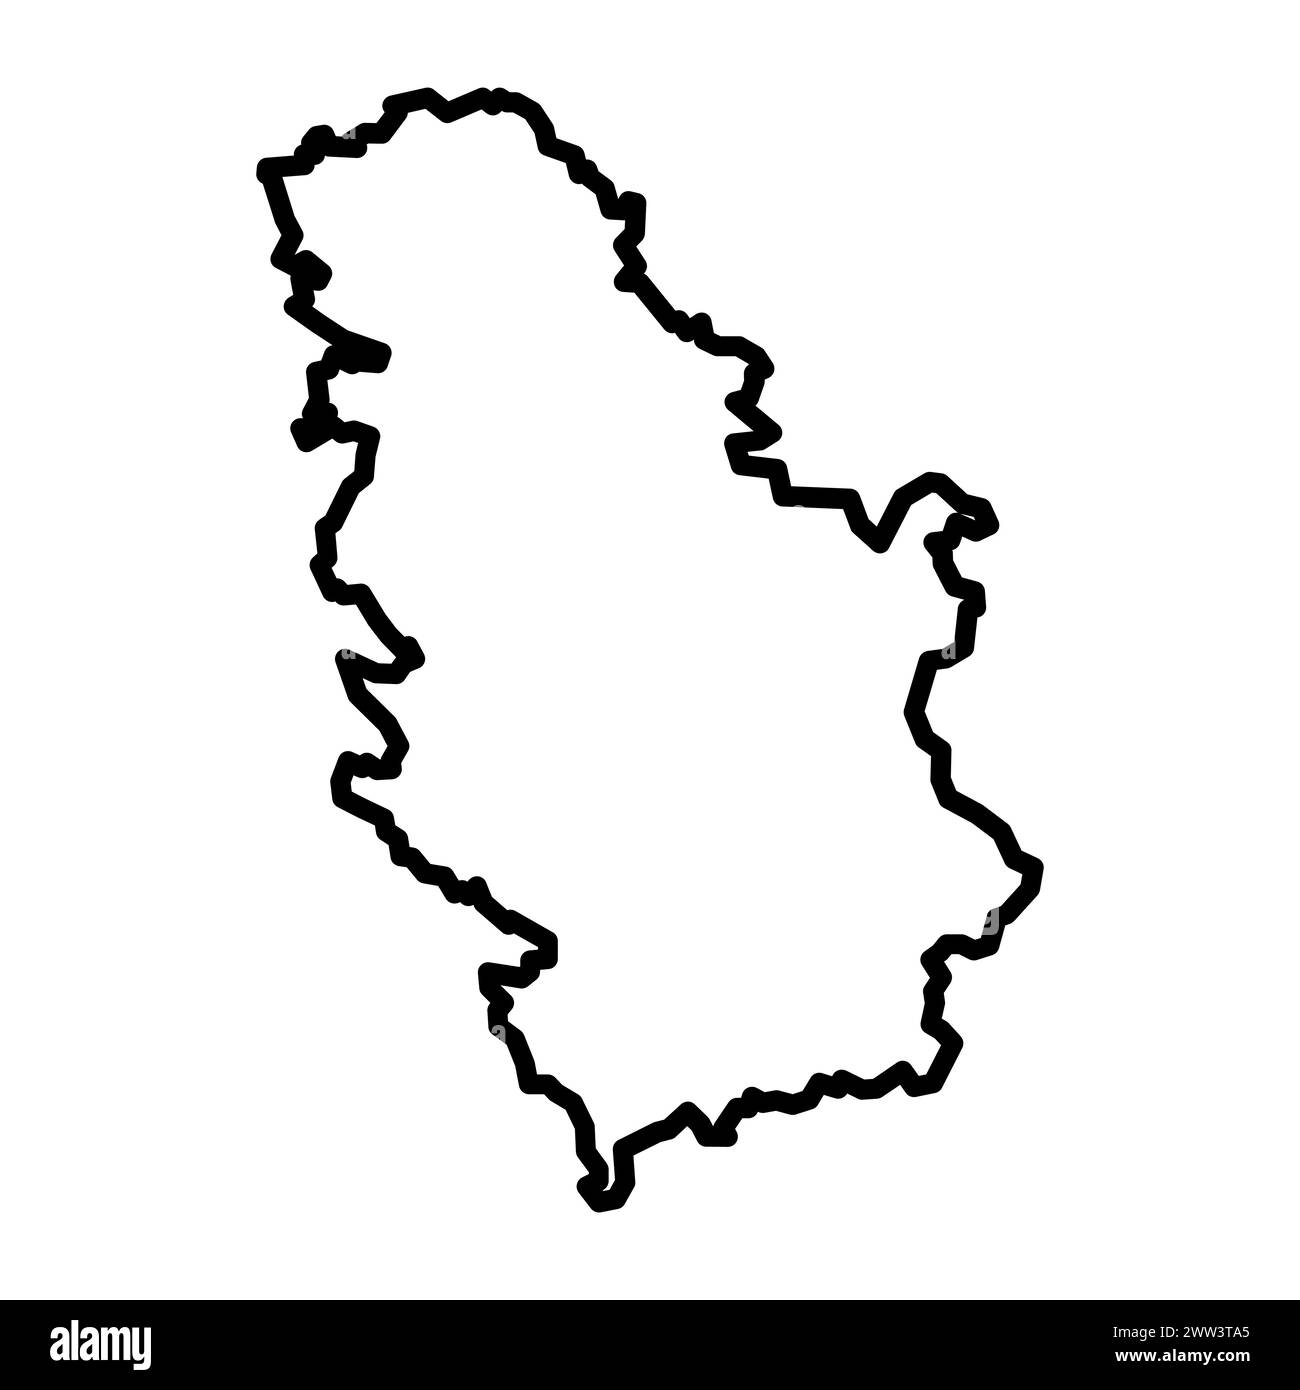 vector serbia outline map on white background Stock Vector